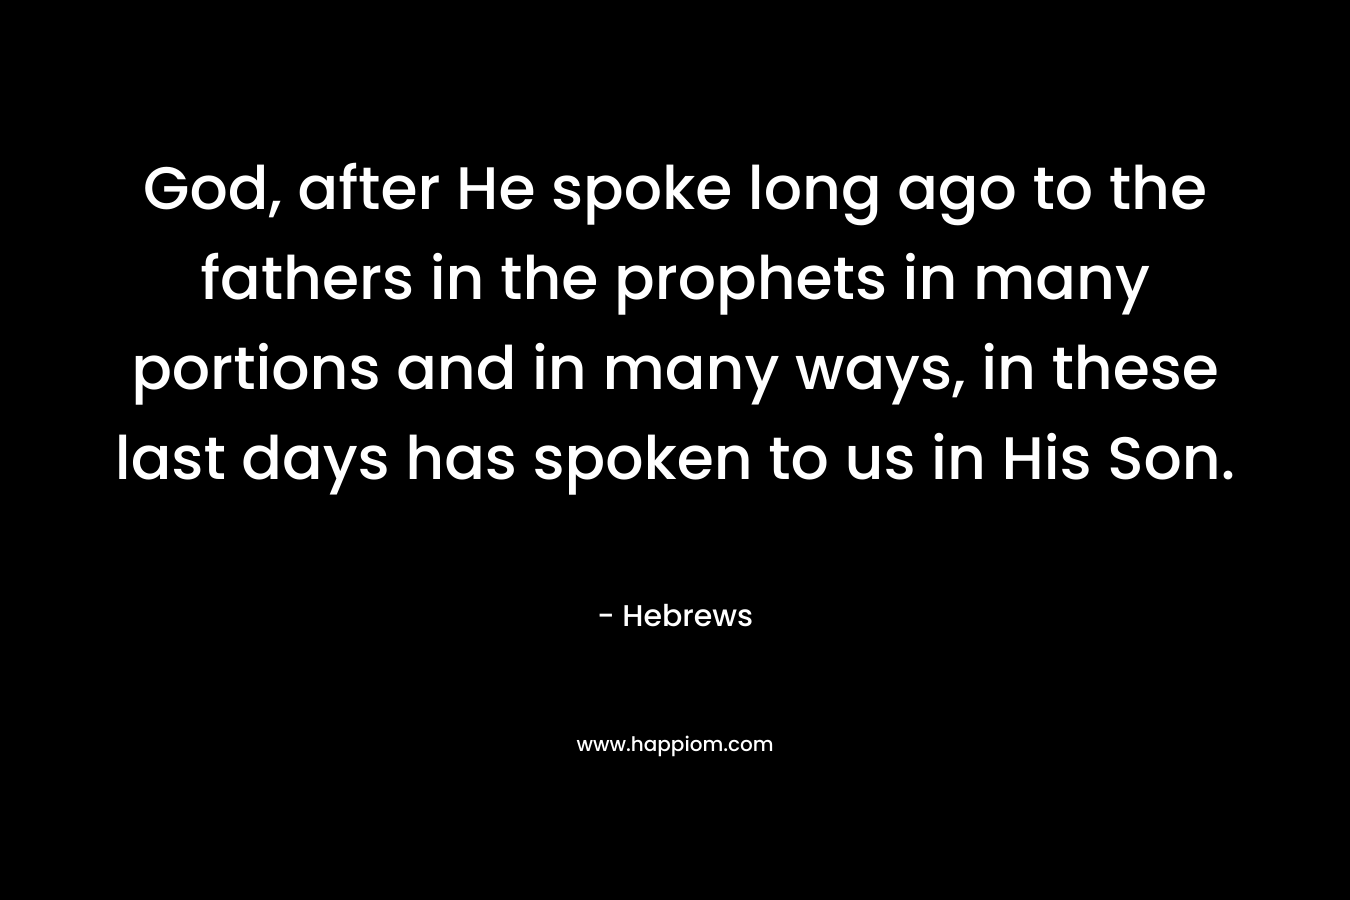 God, after He spoke long ago to the fathers in the prophets in many portions and in many ways, in these last days has spoken to us in His Son.